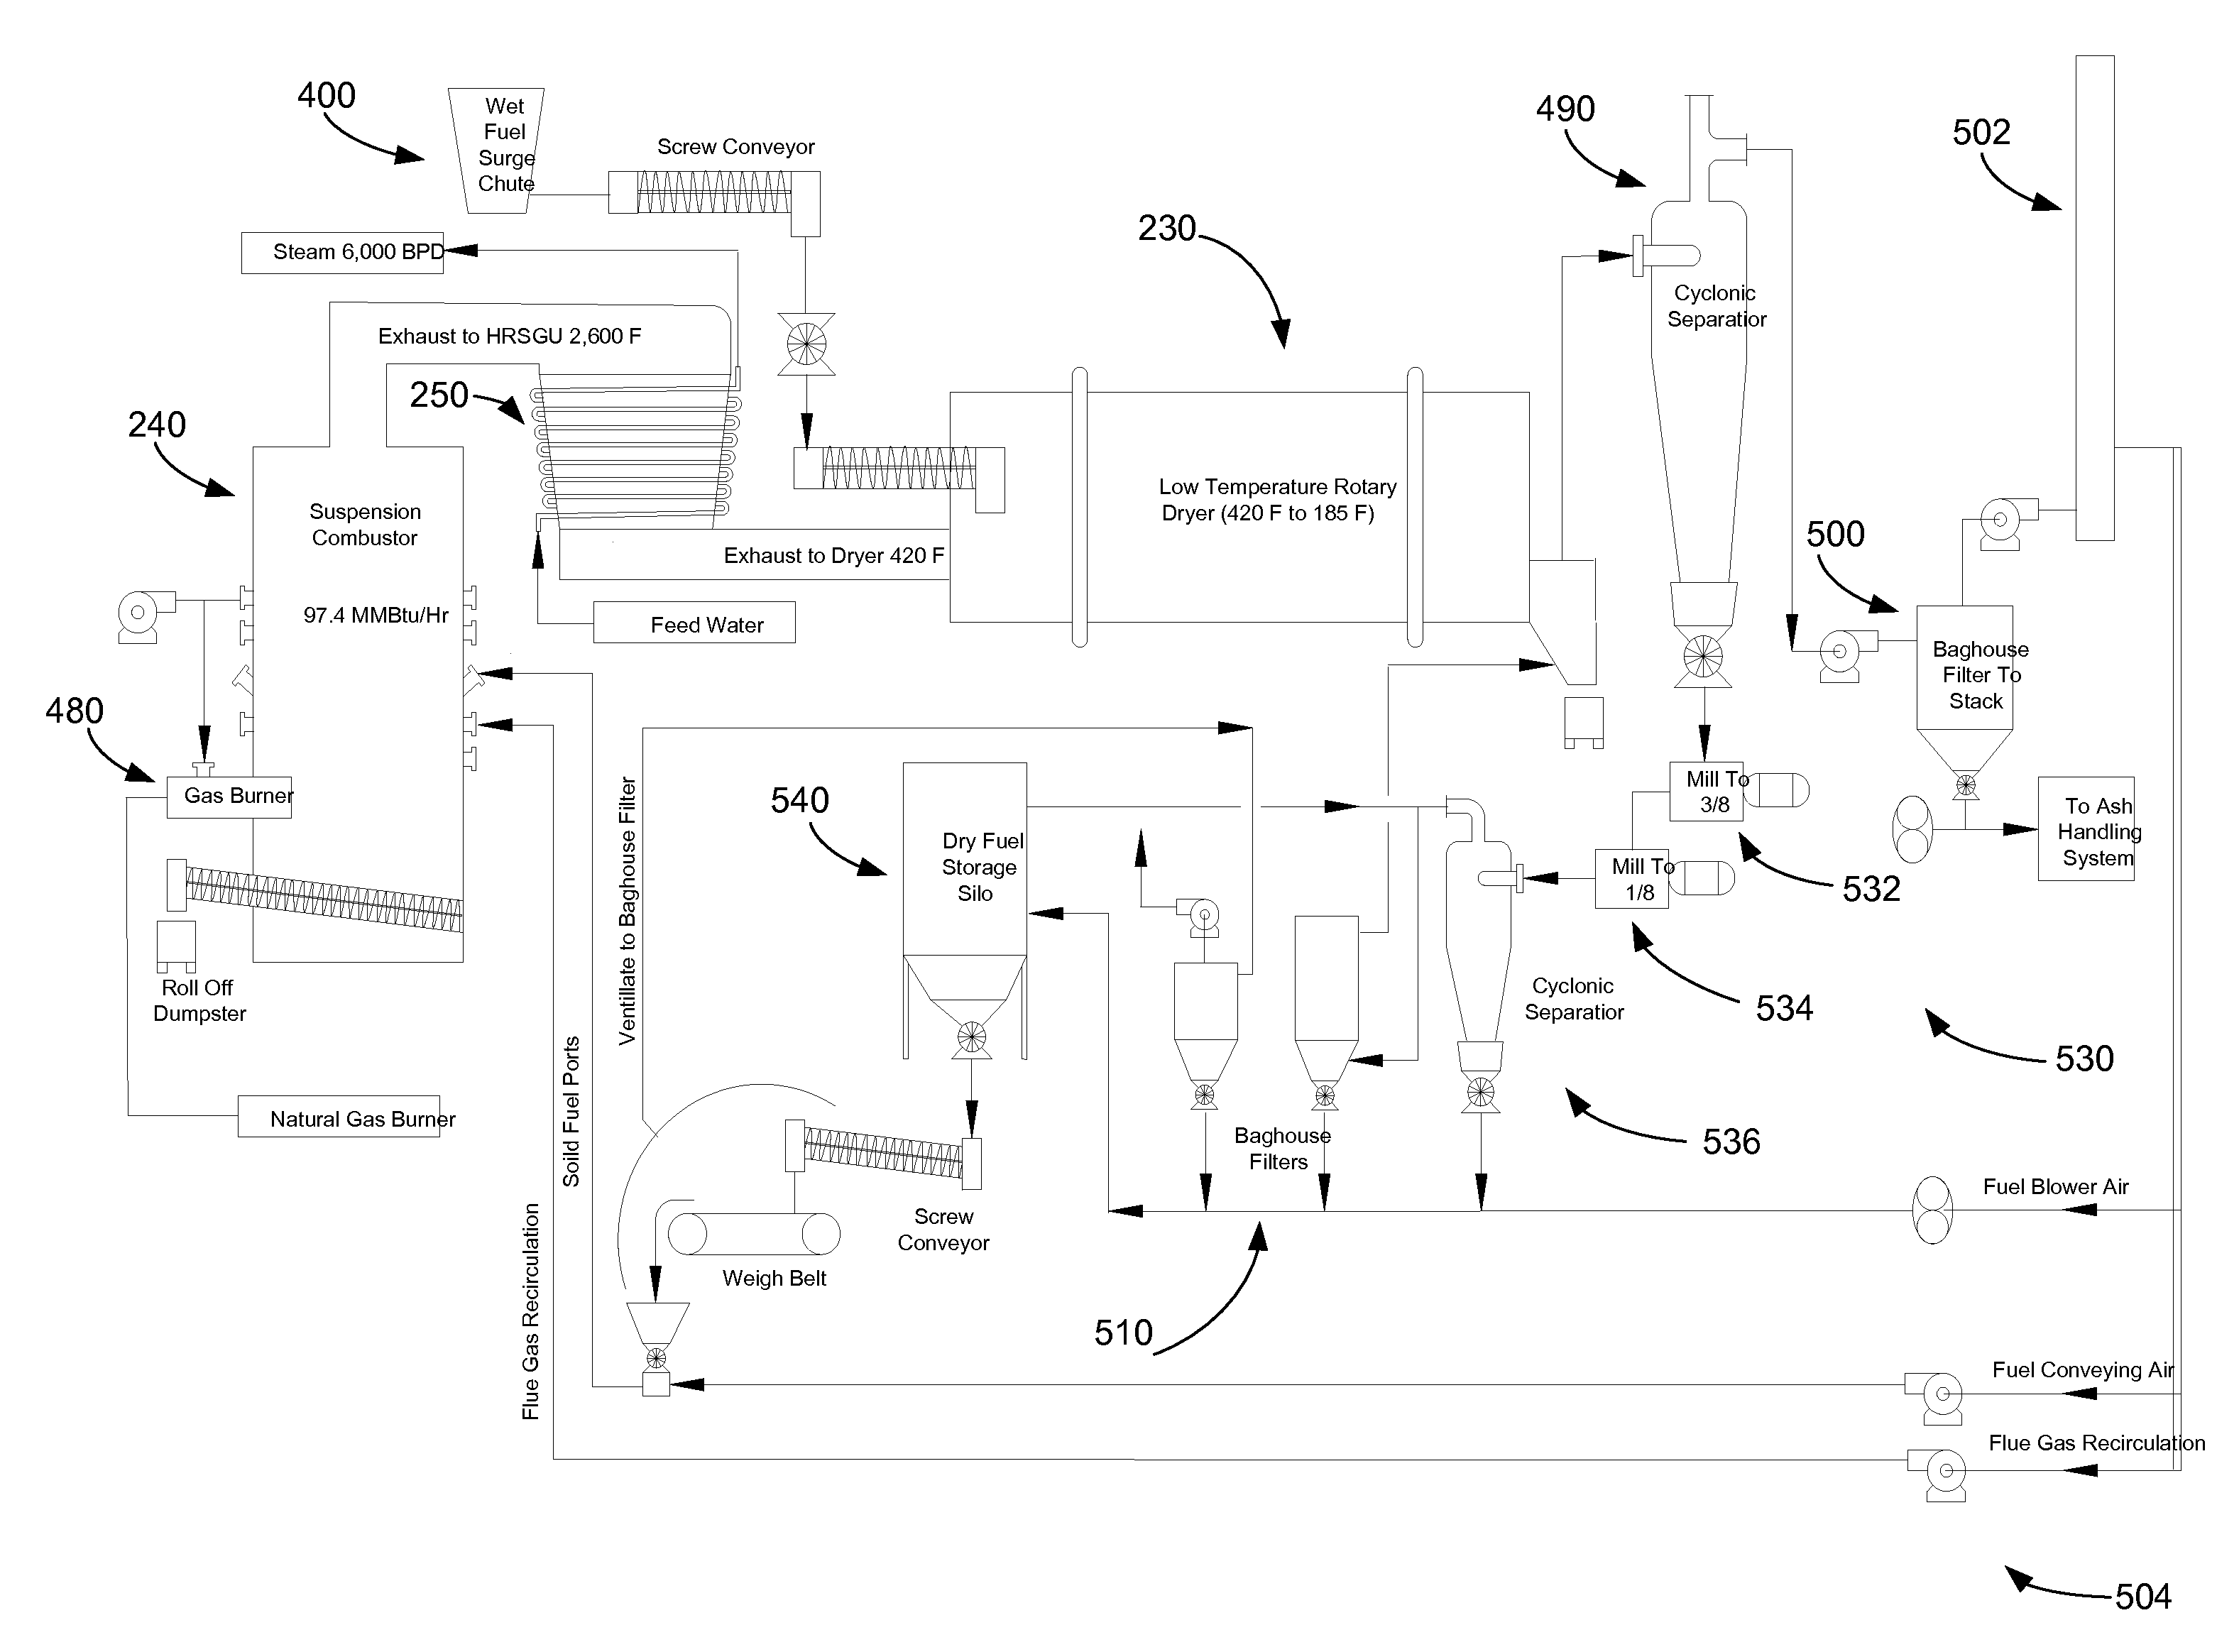 Biomass-to-energy combustion method